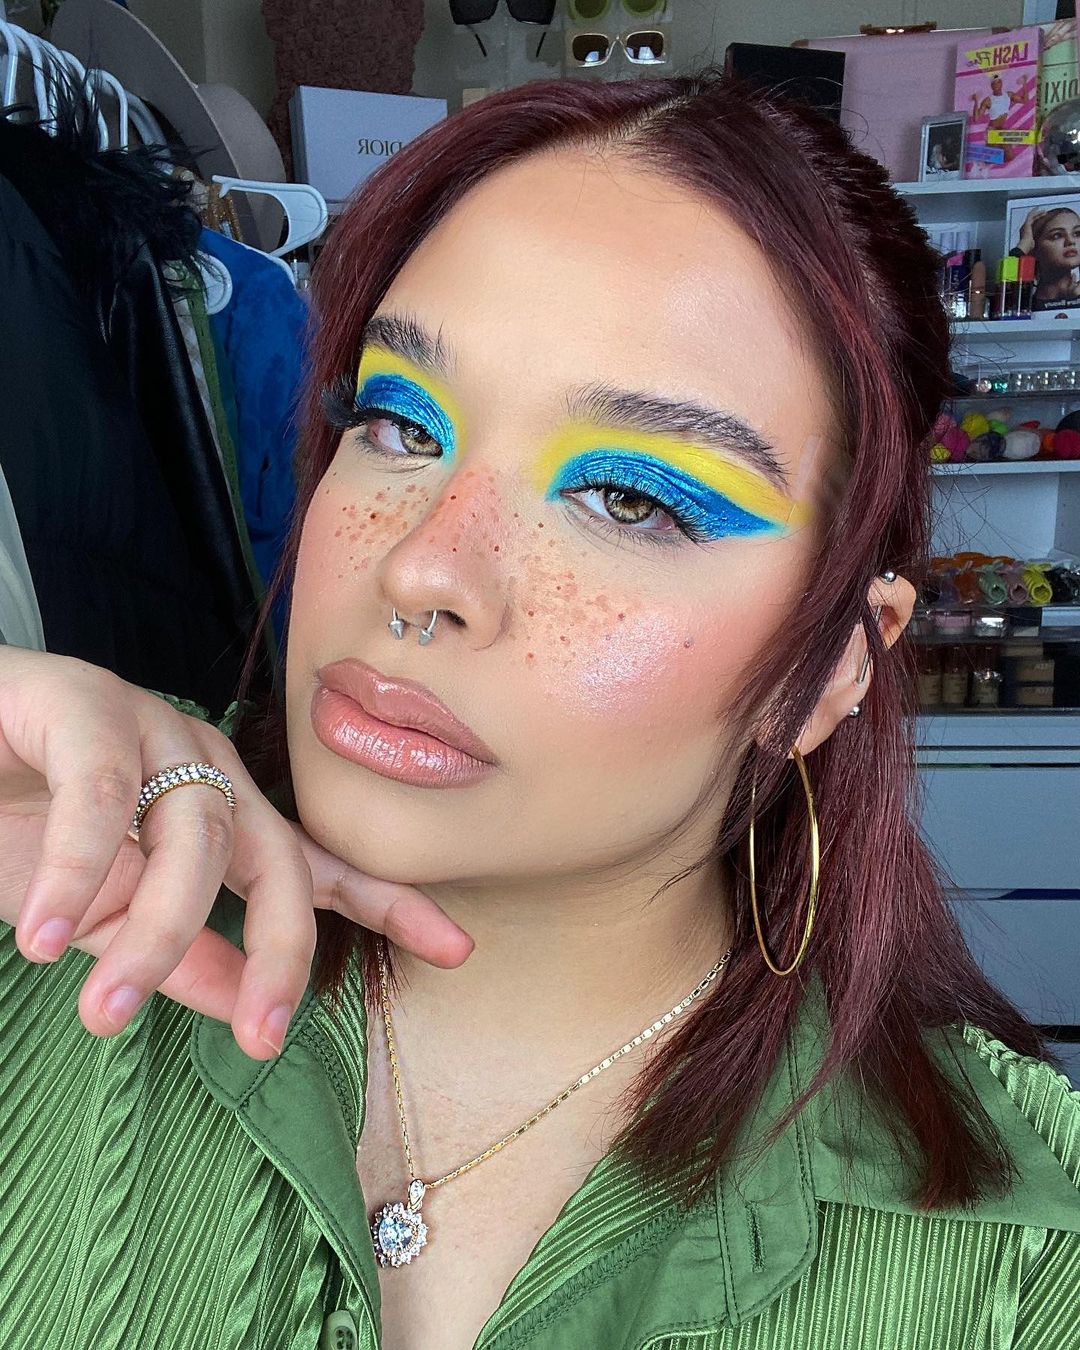 Euphoria's Makeup Artist Reveals The Inspiration Behind Maddy's Look